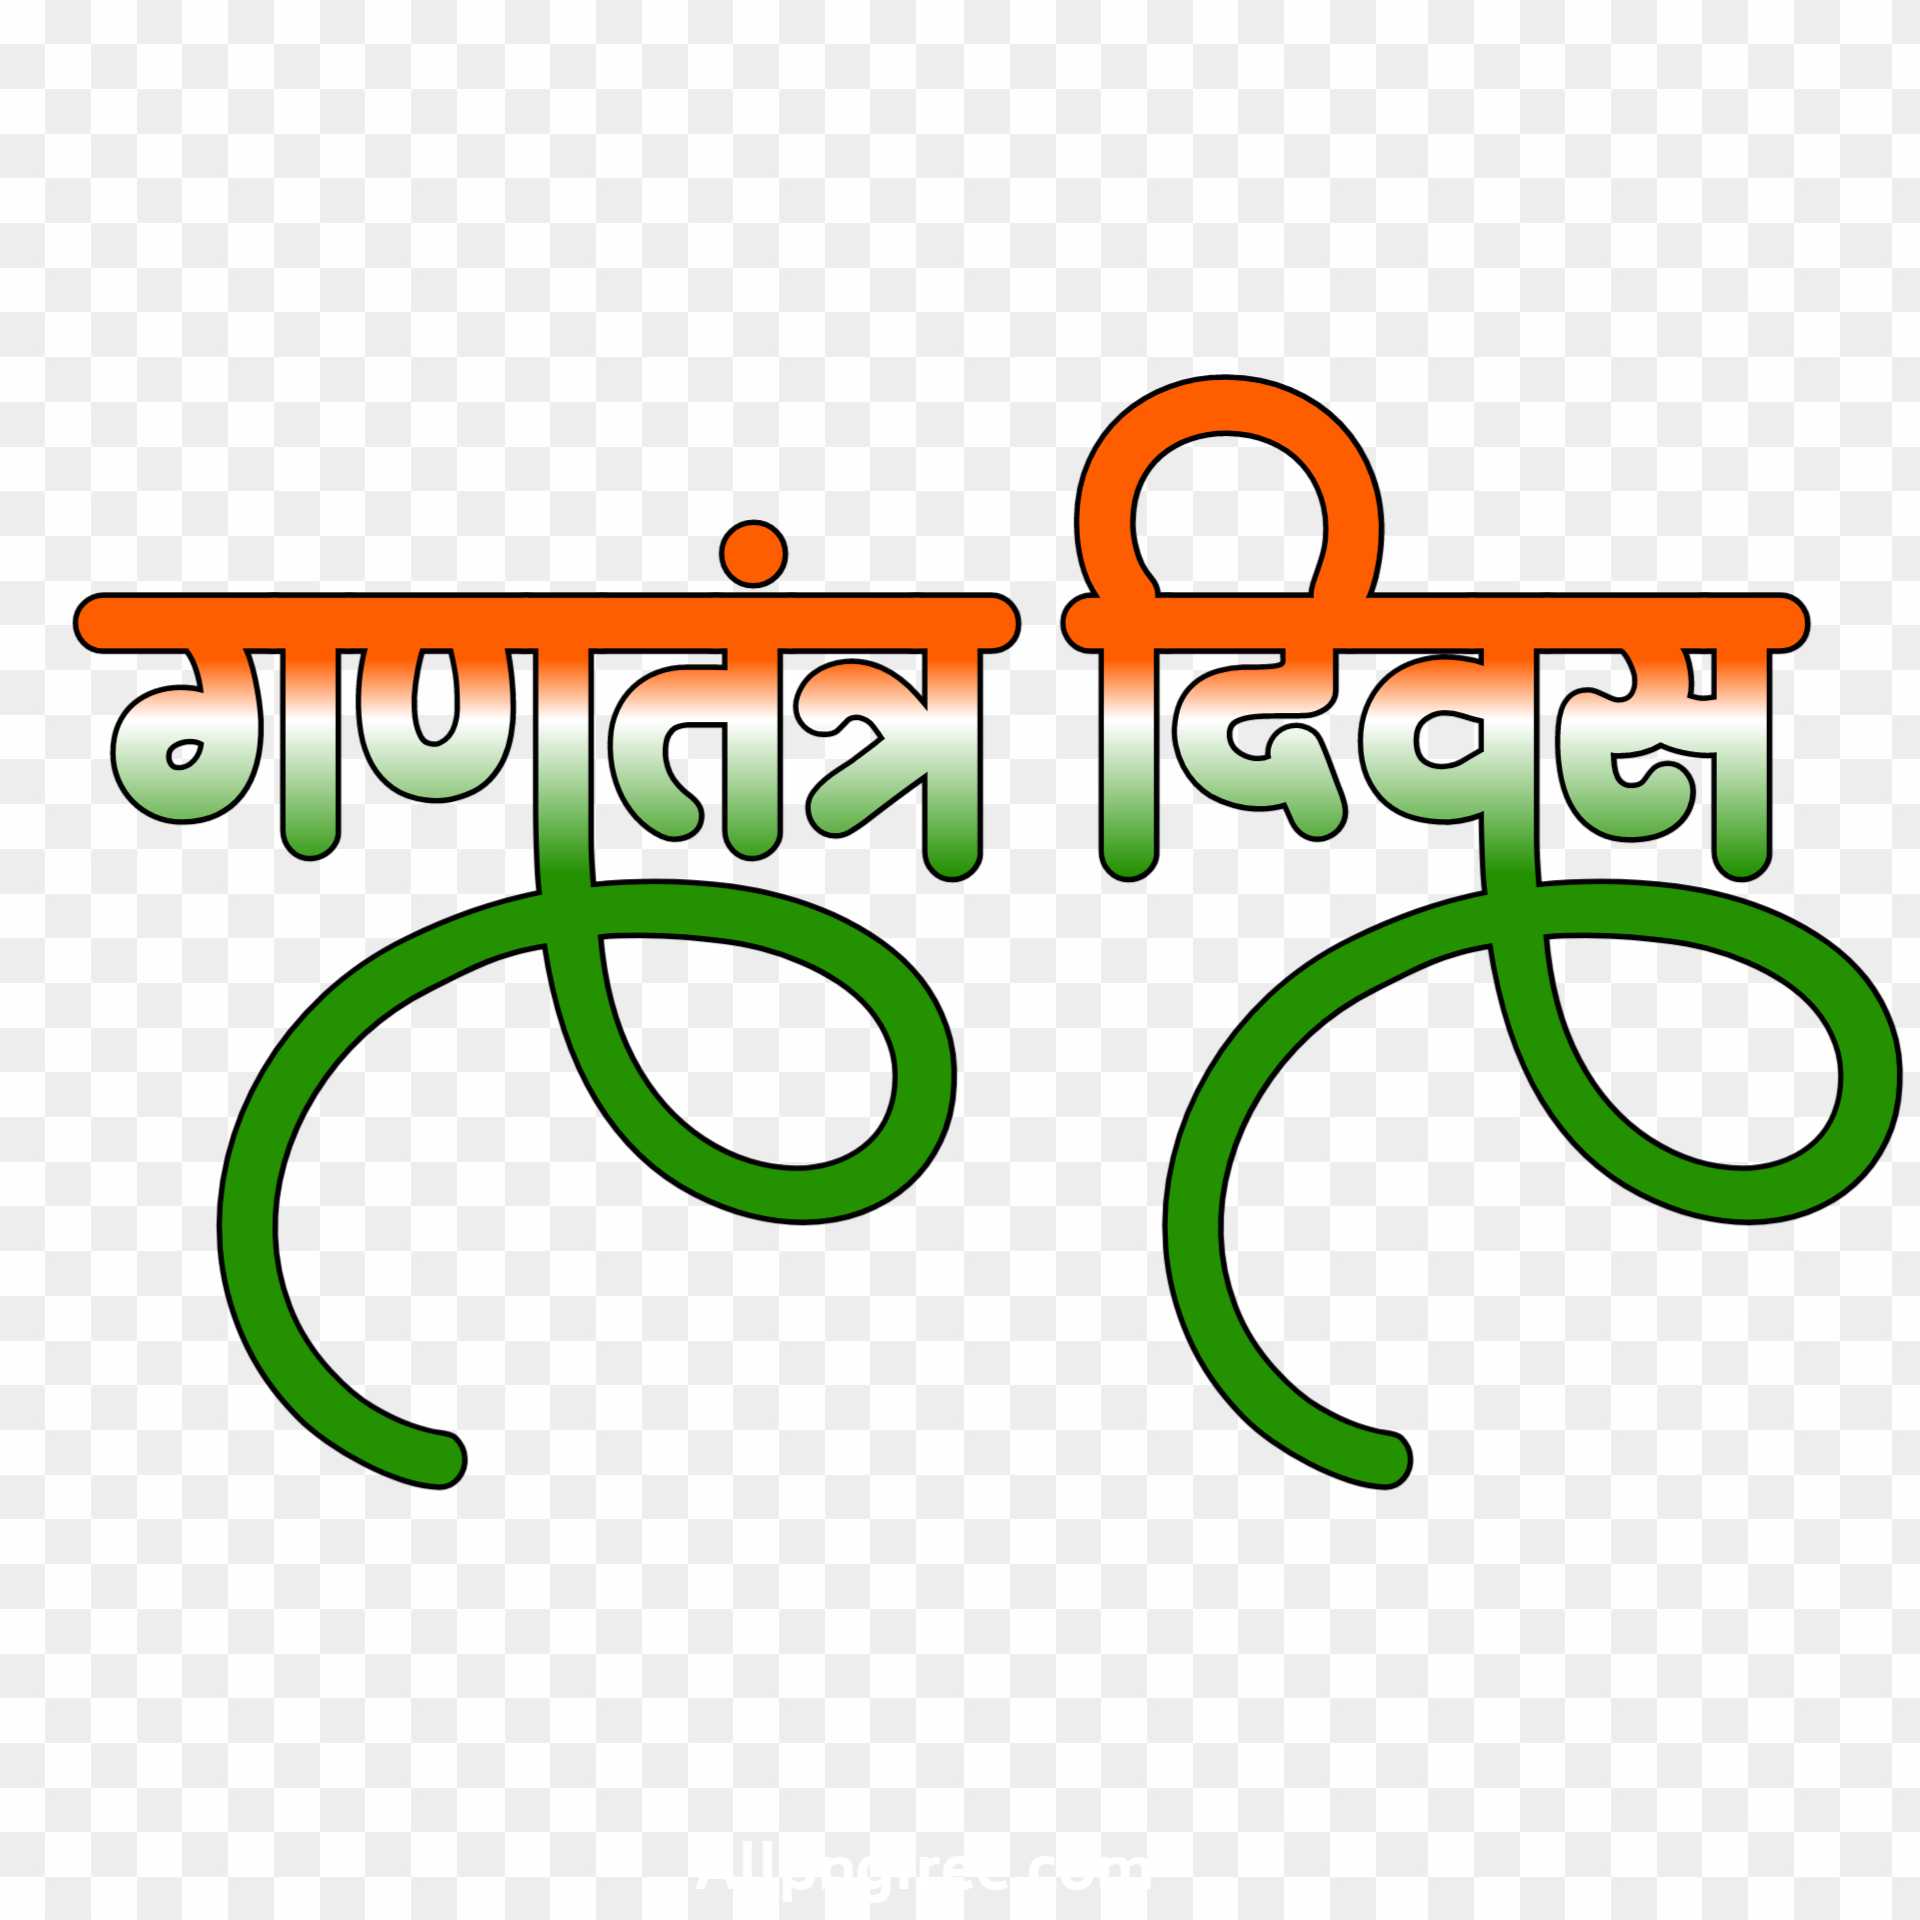 Republic Day in Hindi text PNG images download